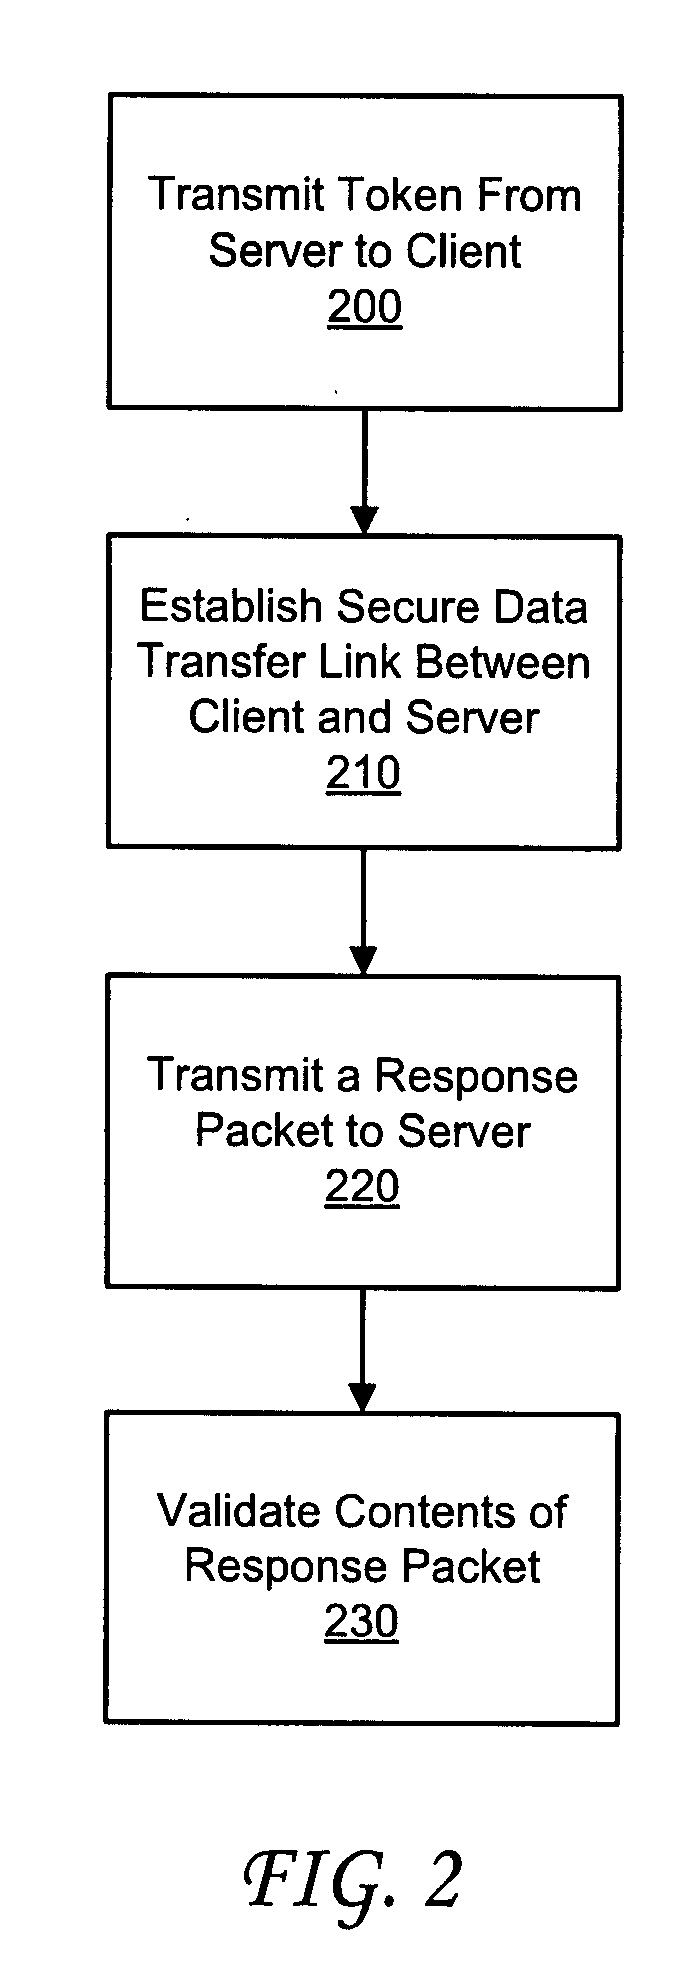 System and method for secured network access